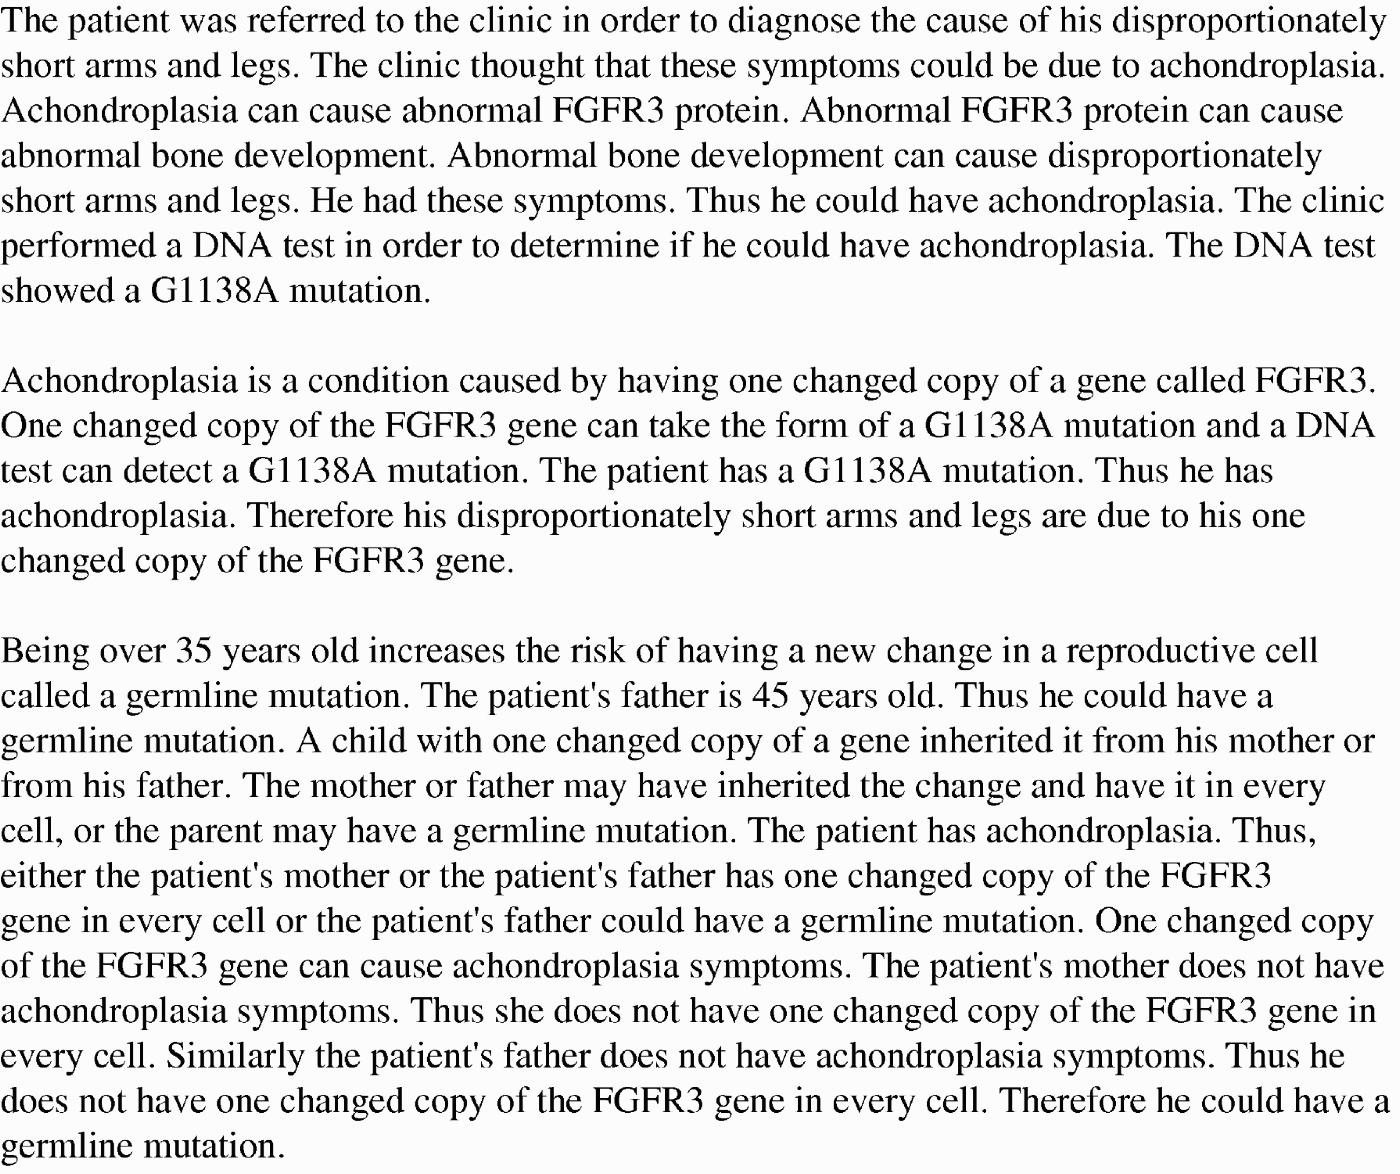 Letter on achondroplasia case generated by GenIE Assistant.